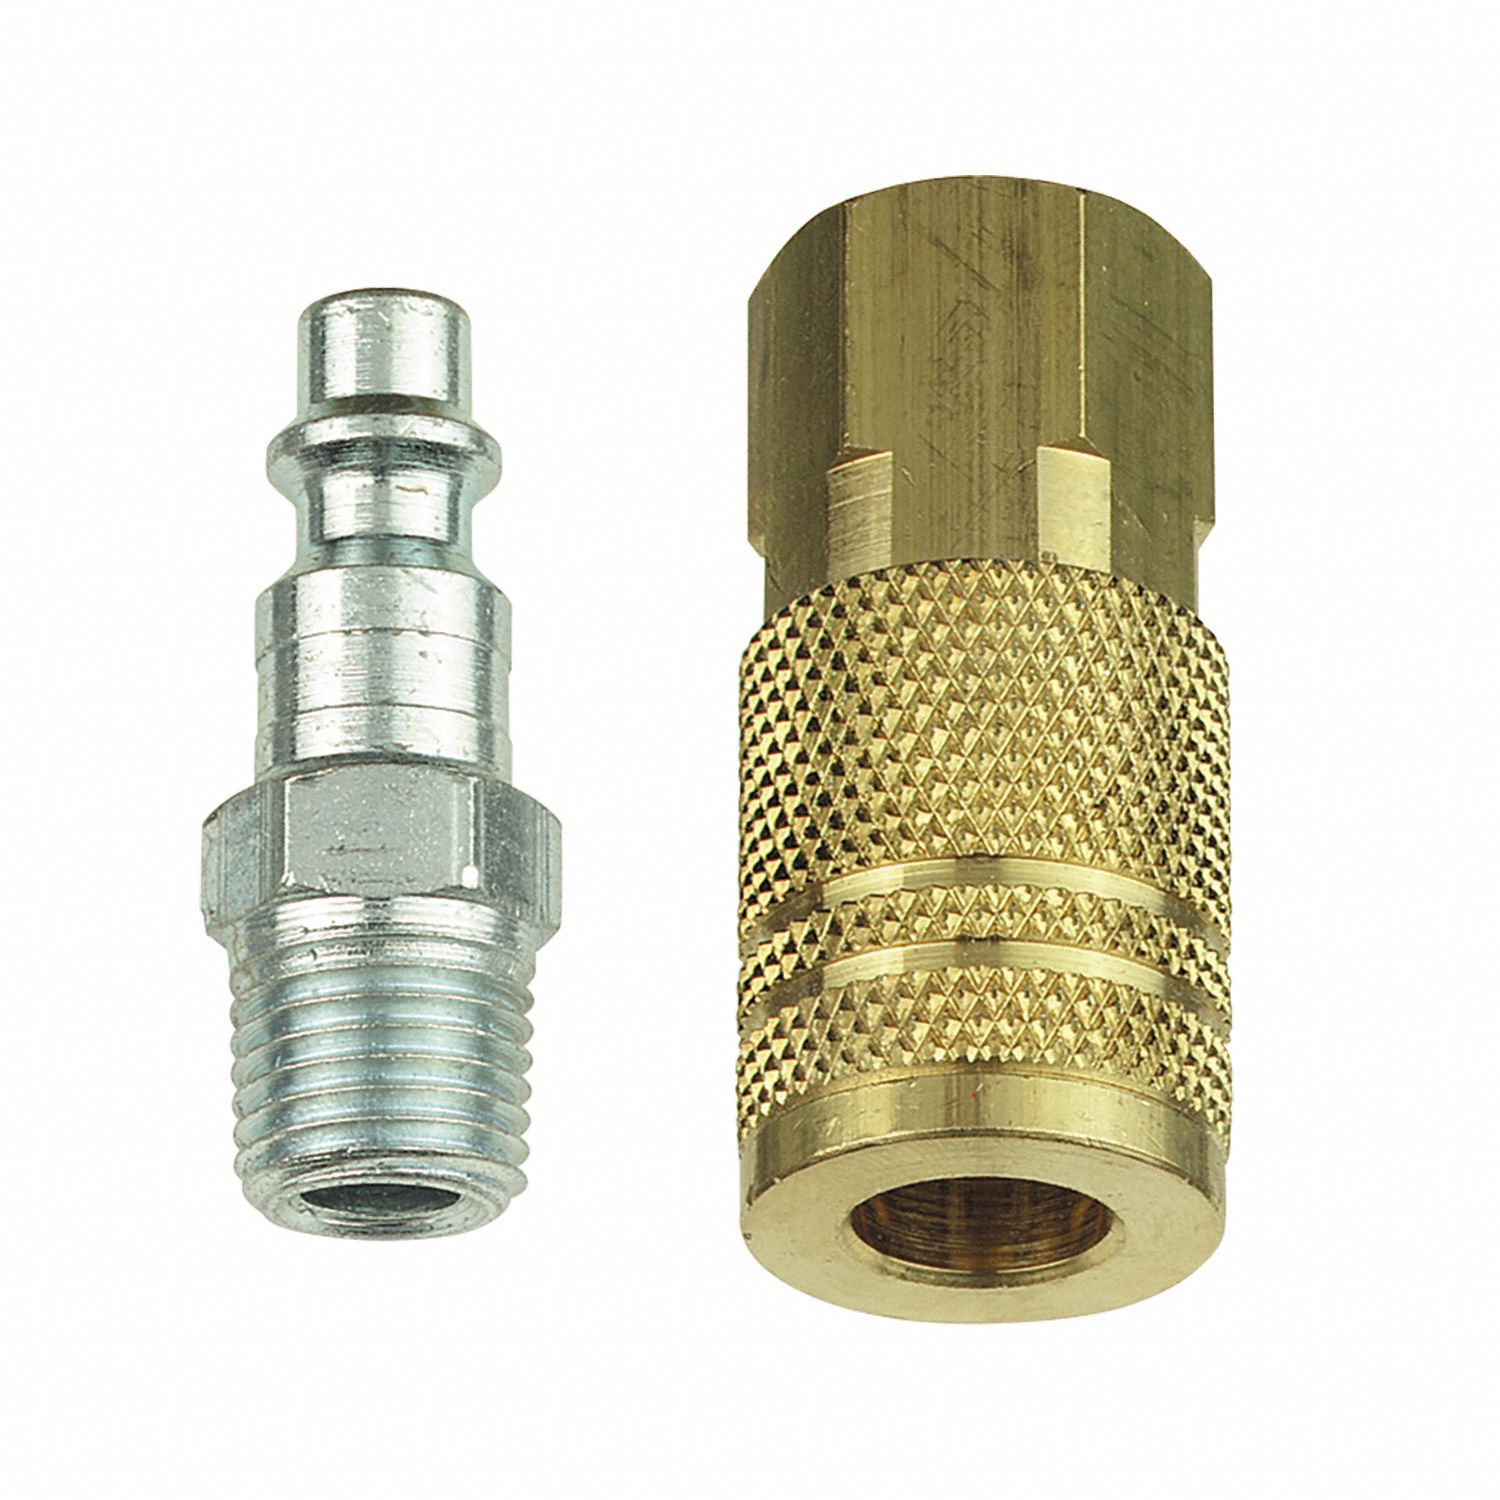 Quick Connect Hose Coupling Set: 1/4 in Coupling Size, 1/4 in Hose Fitting Size, Sleeve